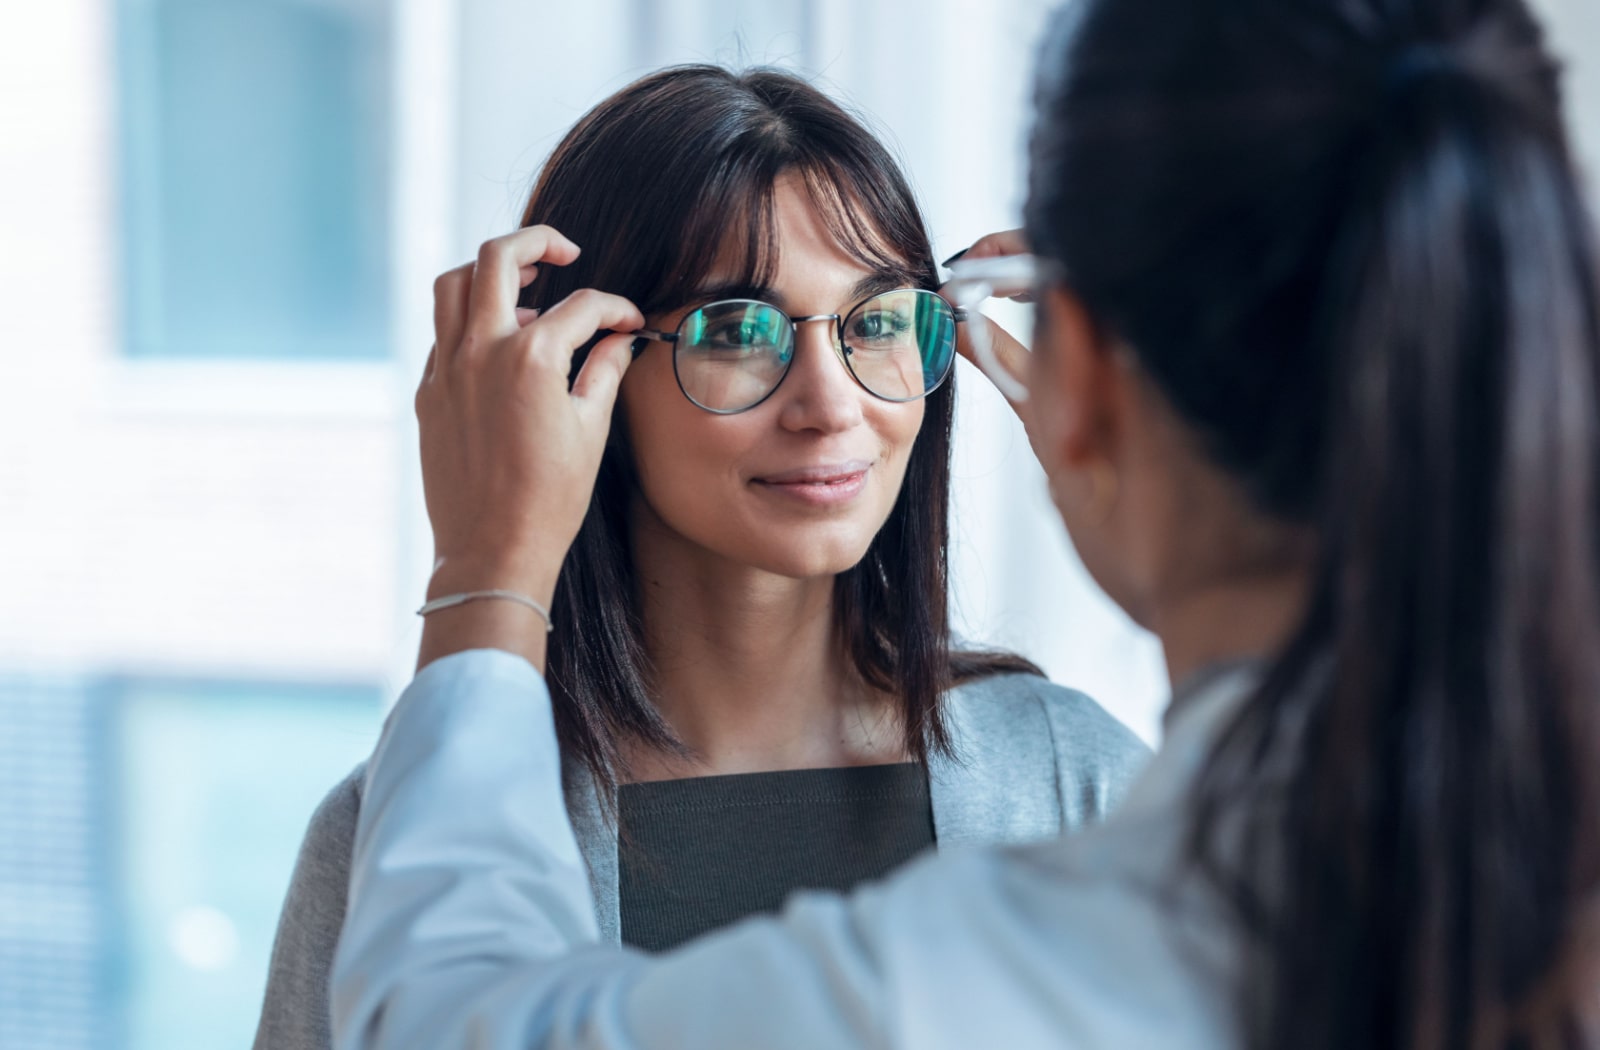 An optician places glasses on a young woman face, helping her fit the glasses for the other woman